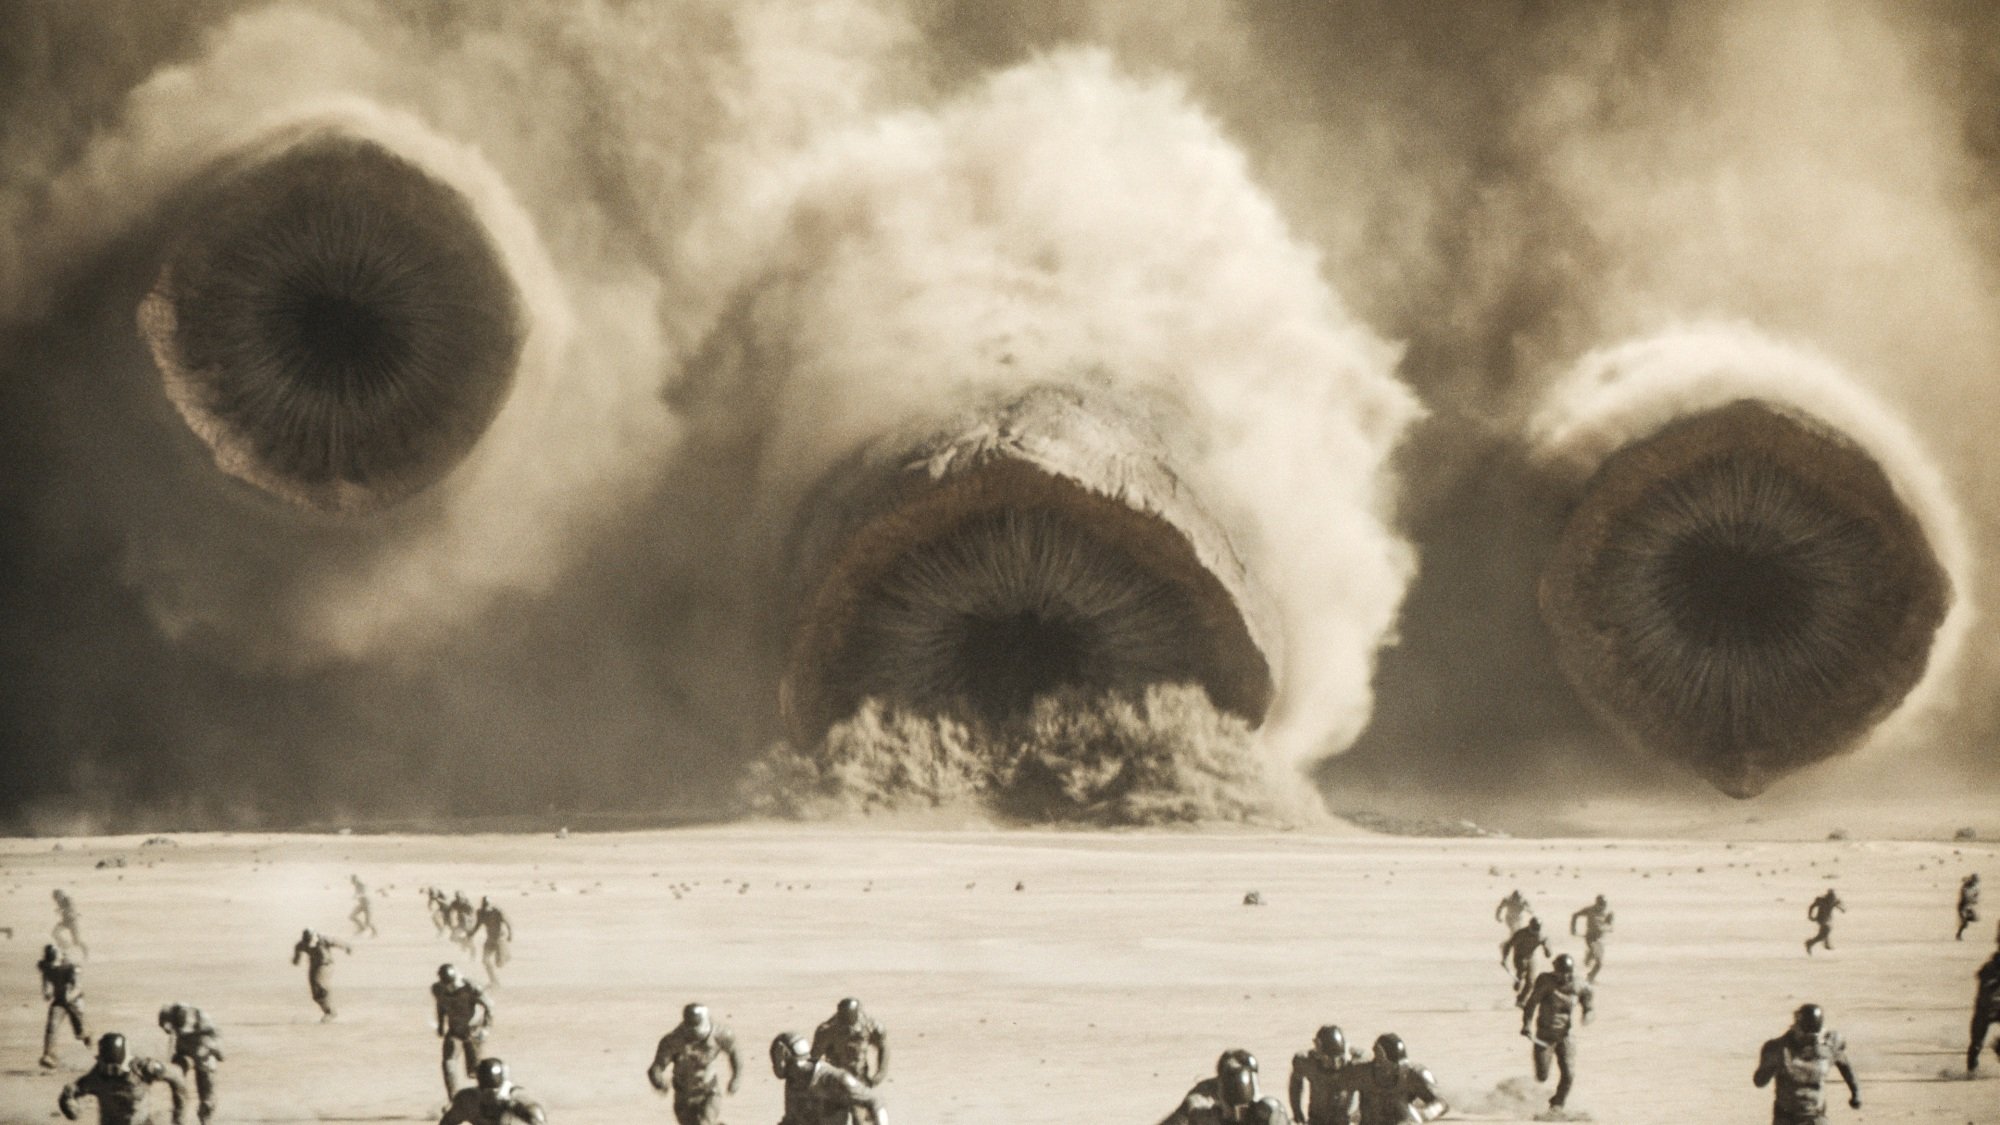 Three sandworms surge towards an army of humans.